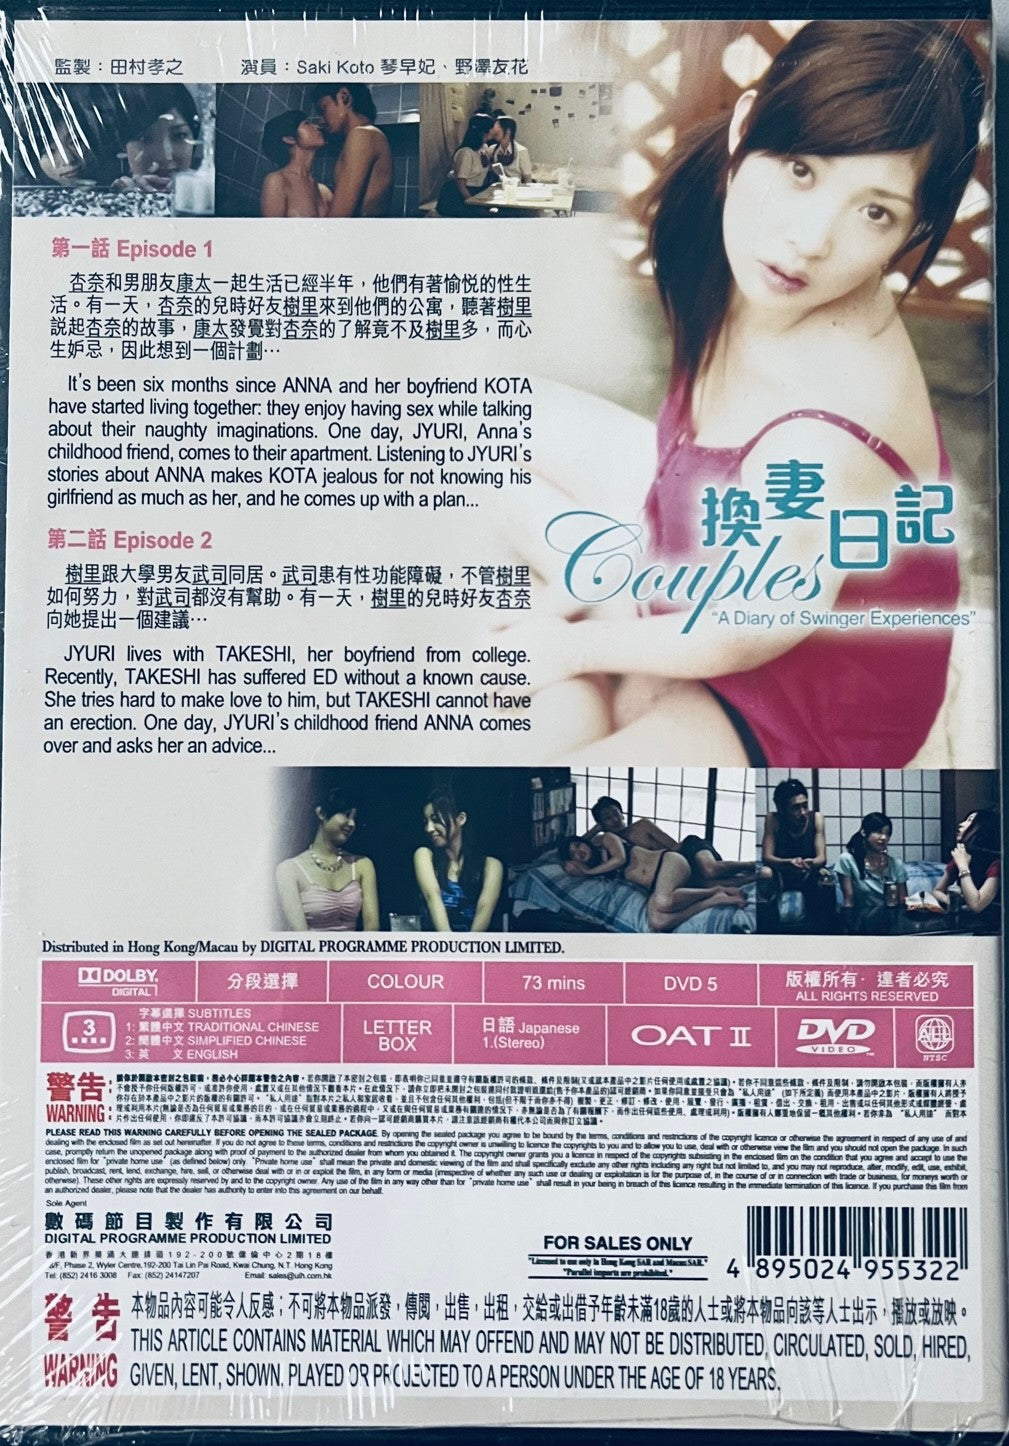 COUPLES A DIARY OF SWINGER EXPERIENCES DVD ENGLISH SUBTITLES (REGION F MoviemusicHK